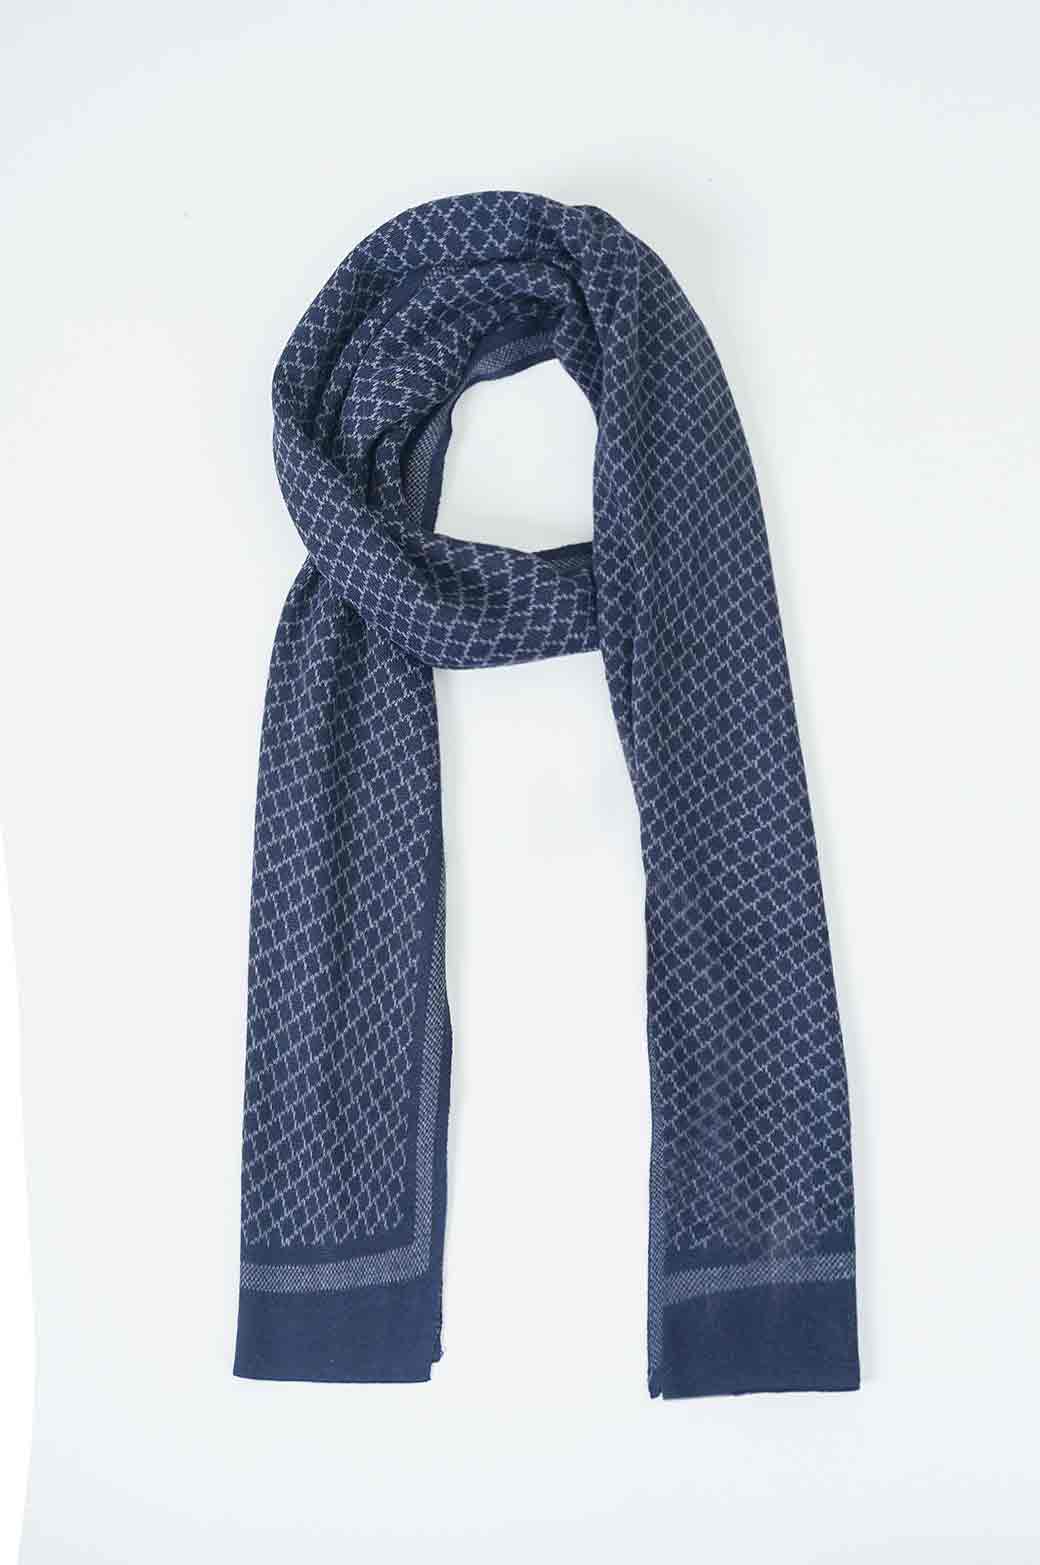 NAVY WOVEN PATTERNED SCARF